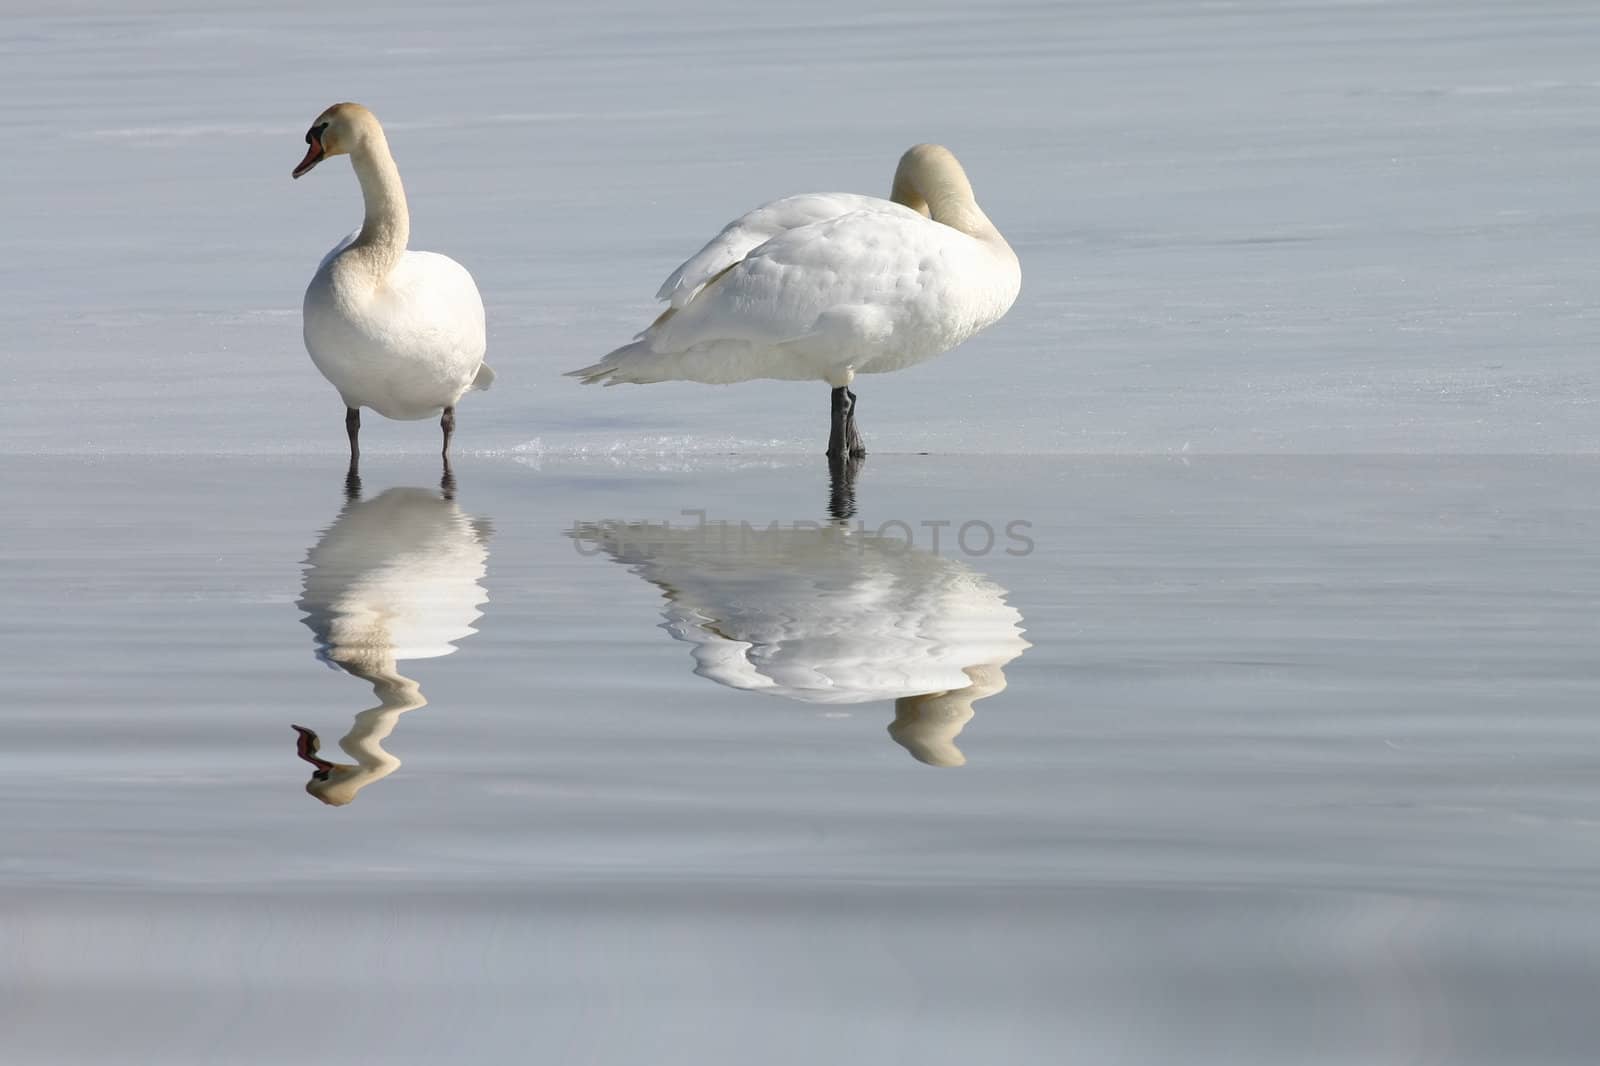 White swans on snow with reflection